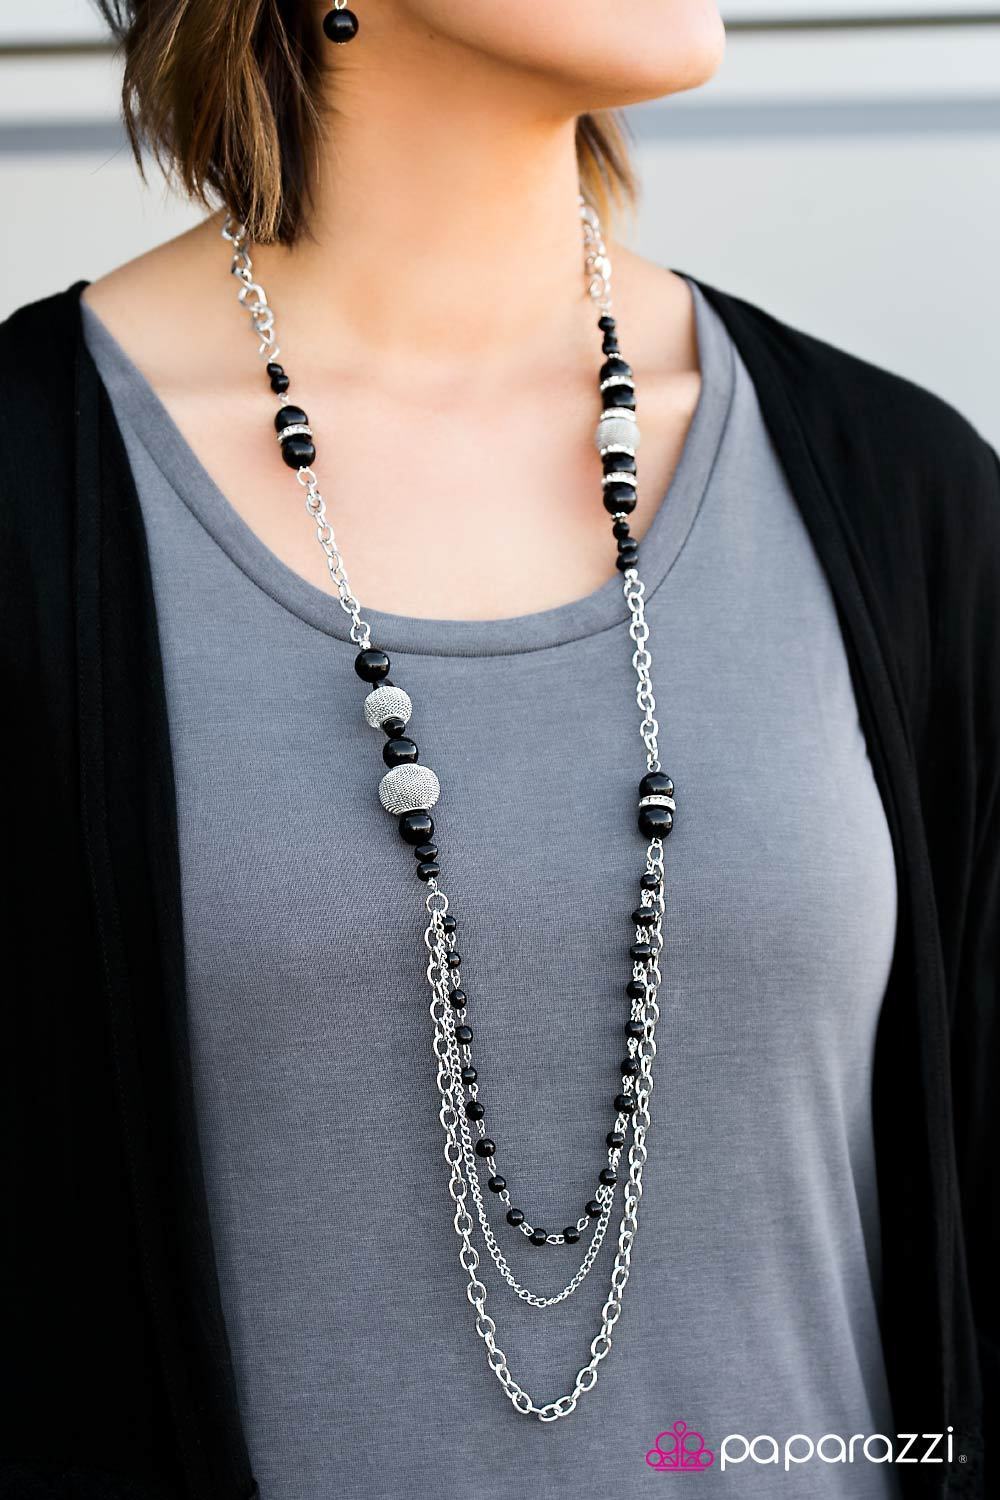 Enmeshed in Elegance Long Black and Silver Necklace and matching Earrings - Paparazzi Accessories-CarasShop.com - $5 Jewelry by Cara Jewels